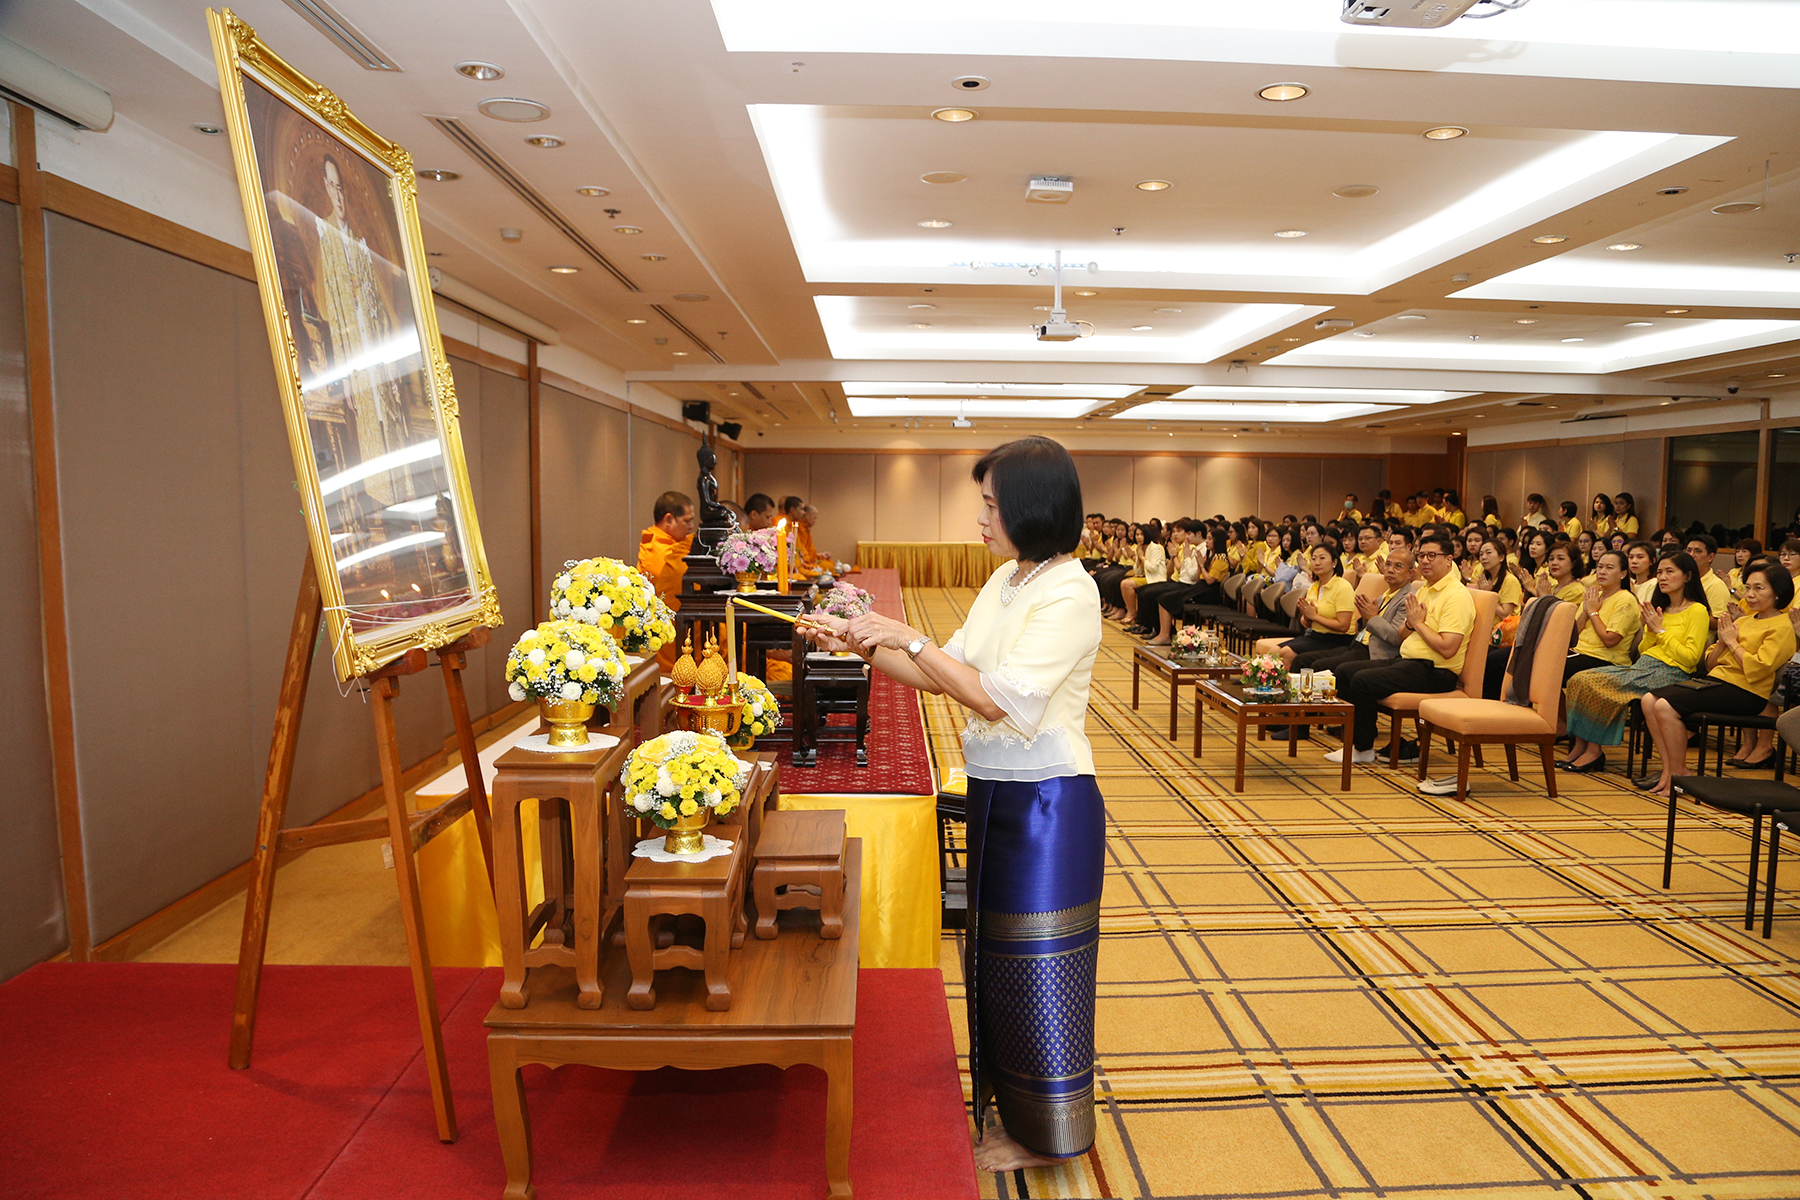 EXIM Thailand Holds Merit-making Ceremony to Mark His Majesty King Bhumibol Adulyadej the Great’s Passing, October 13, 2019